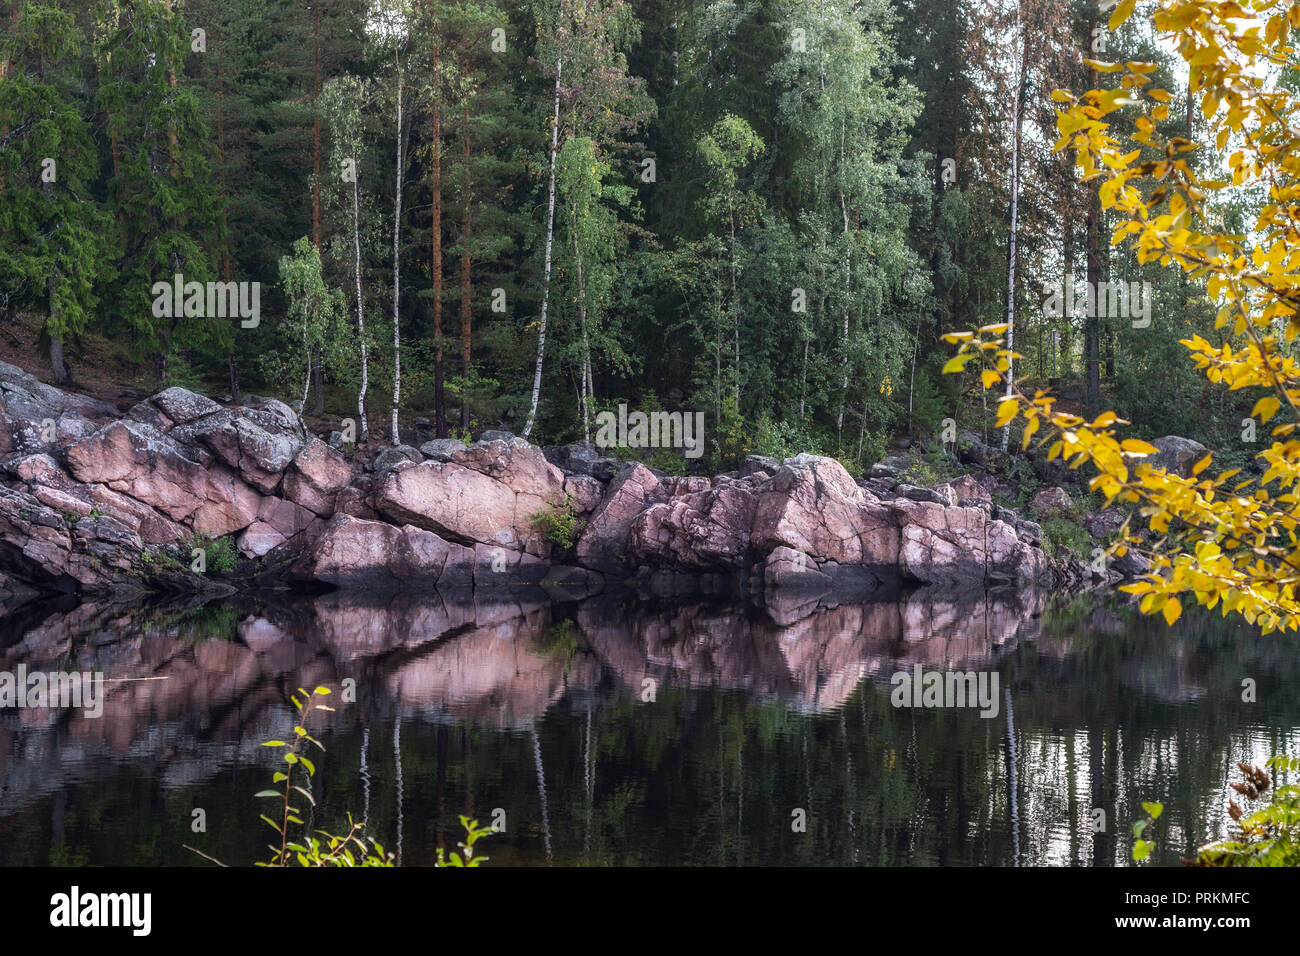 The rocky shore of the river of pink stone reflected on the surface of the water in the Finnish city of Imatra. Stock Photo